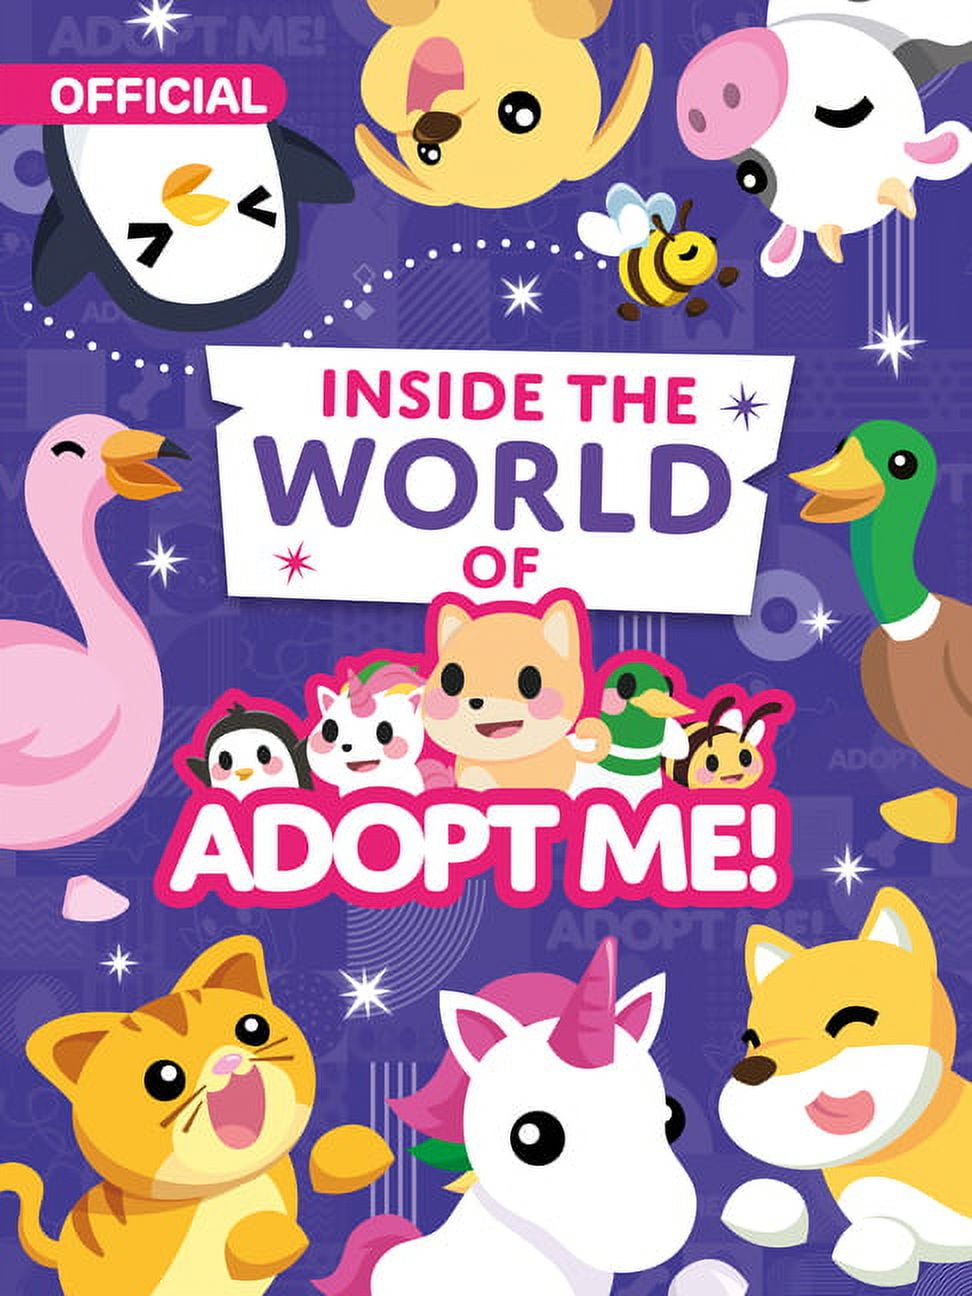 My adopt me trading story - Free stories online. Create books for